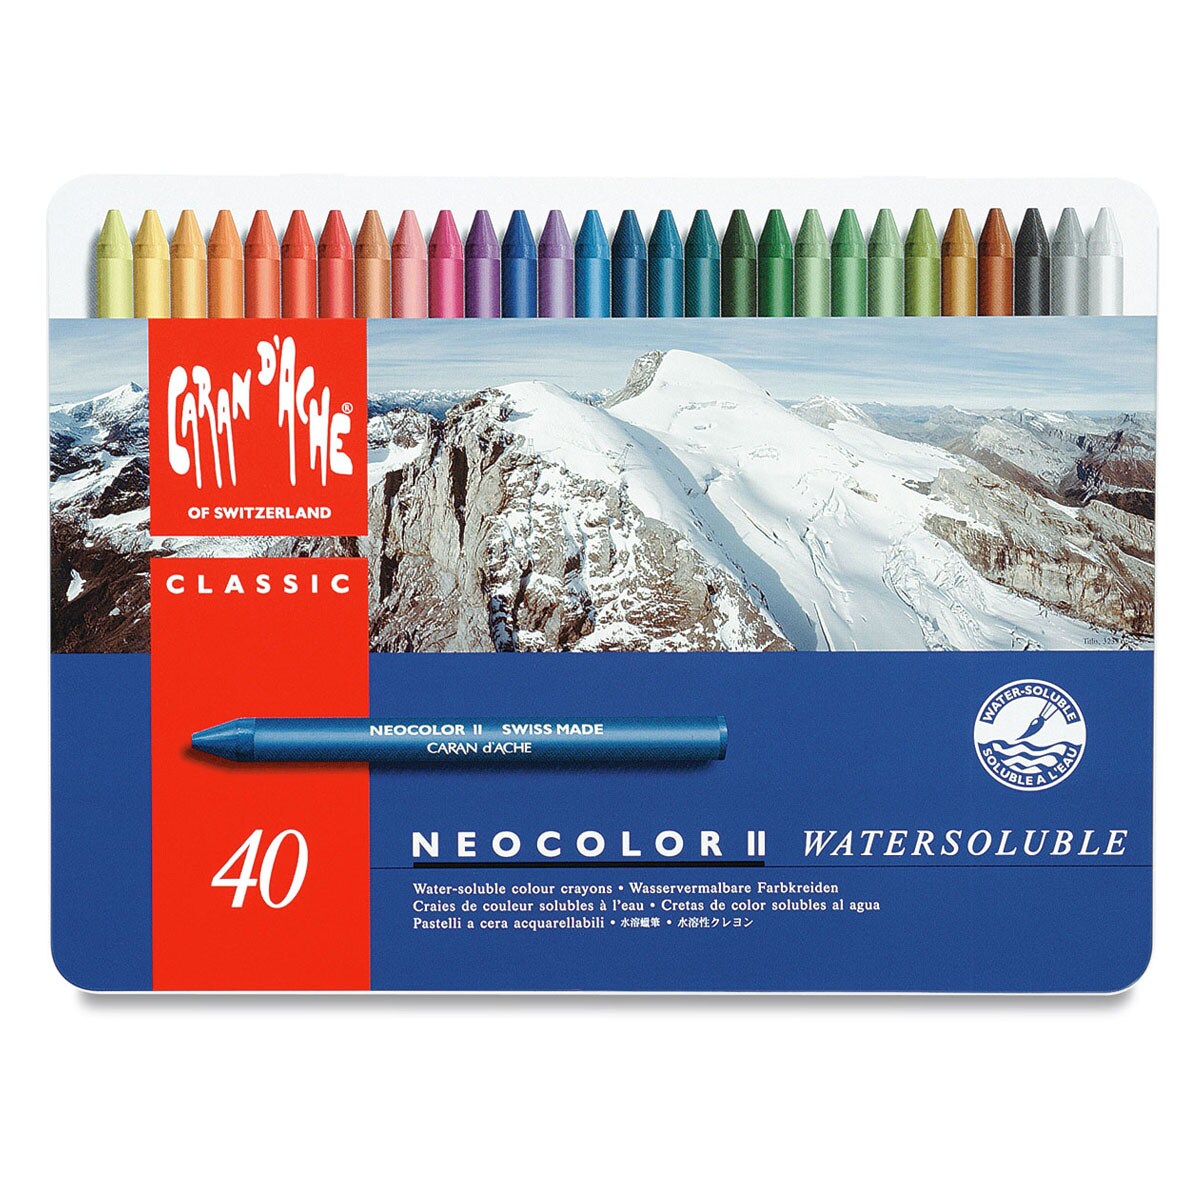 Box of 10 Neocolor II water-soluble wax pastels in warm shades